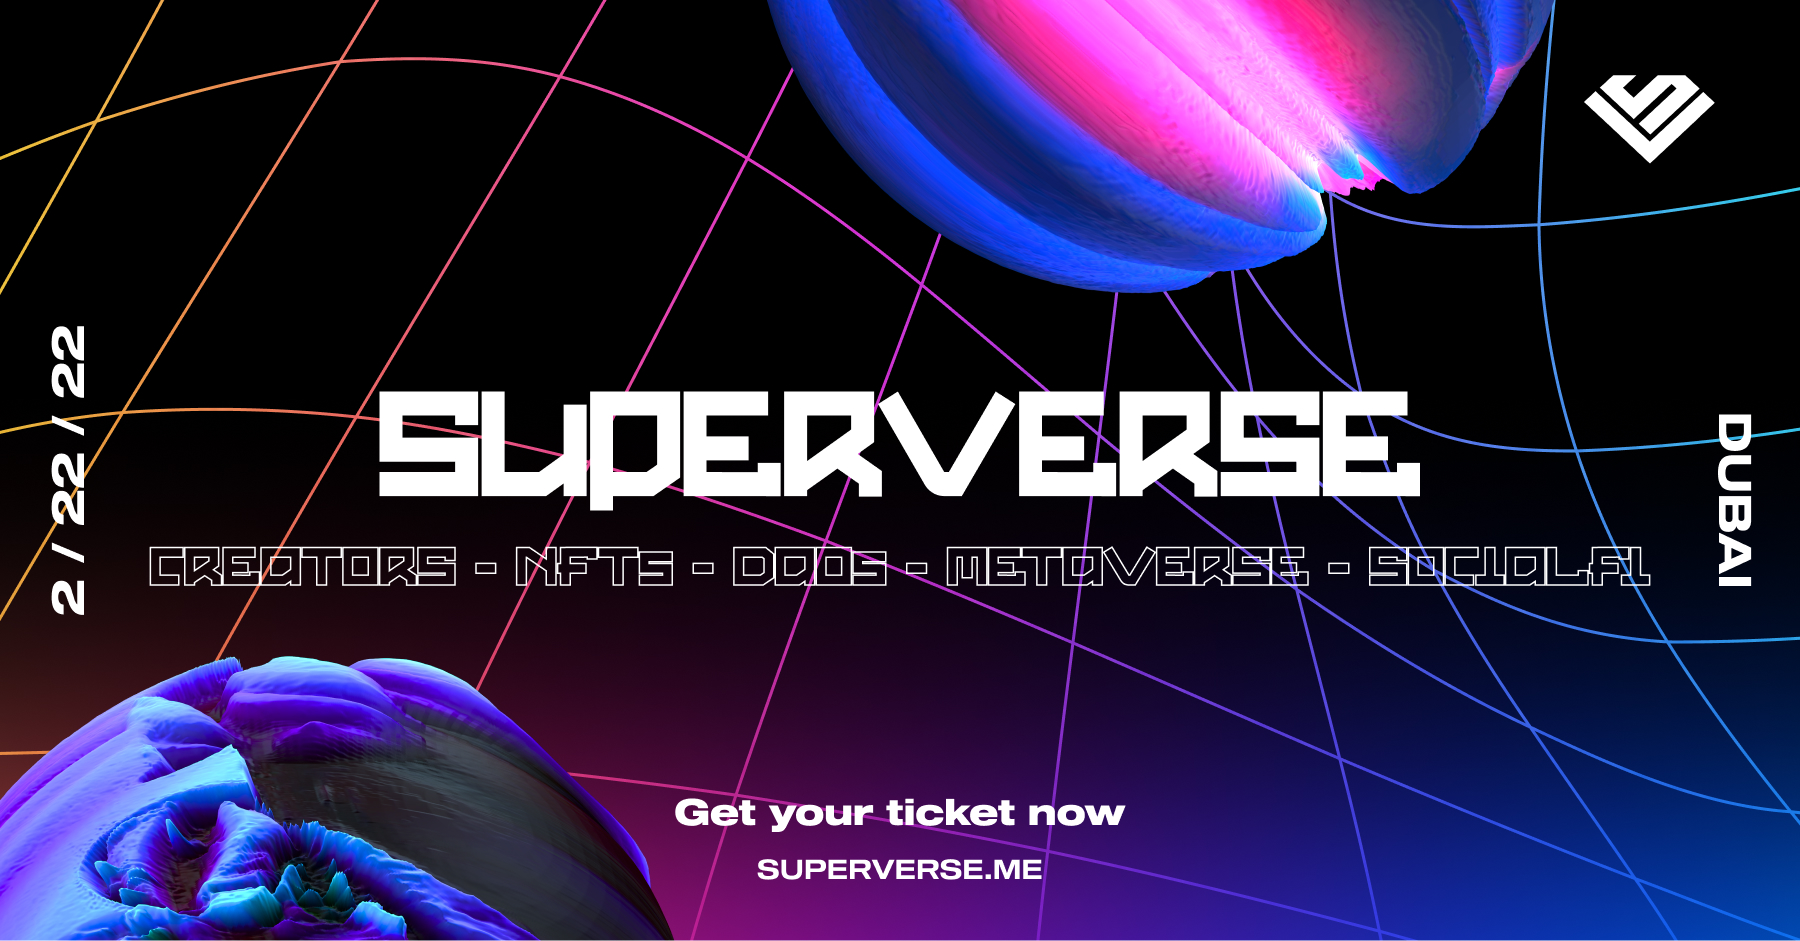 New event SUPERVERSE to become the largest creator summit covering web3 and the metaverse